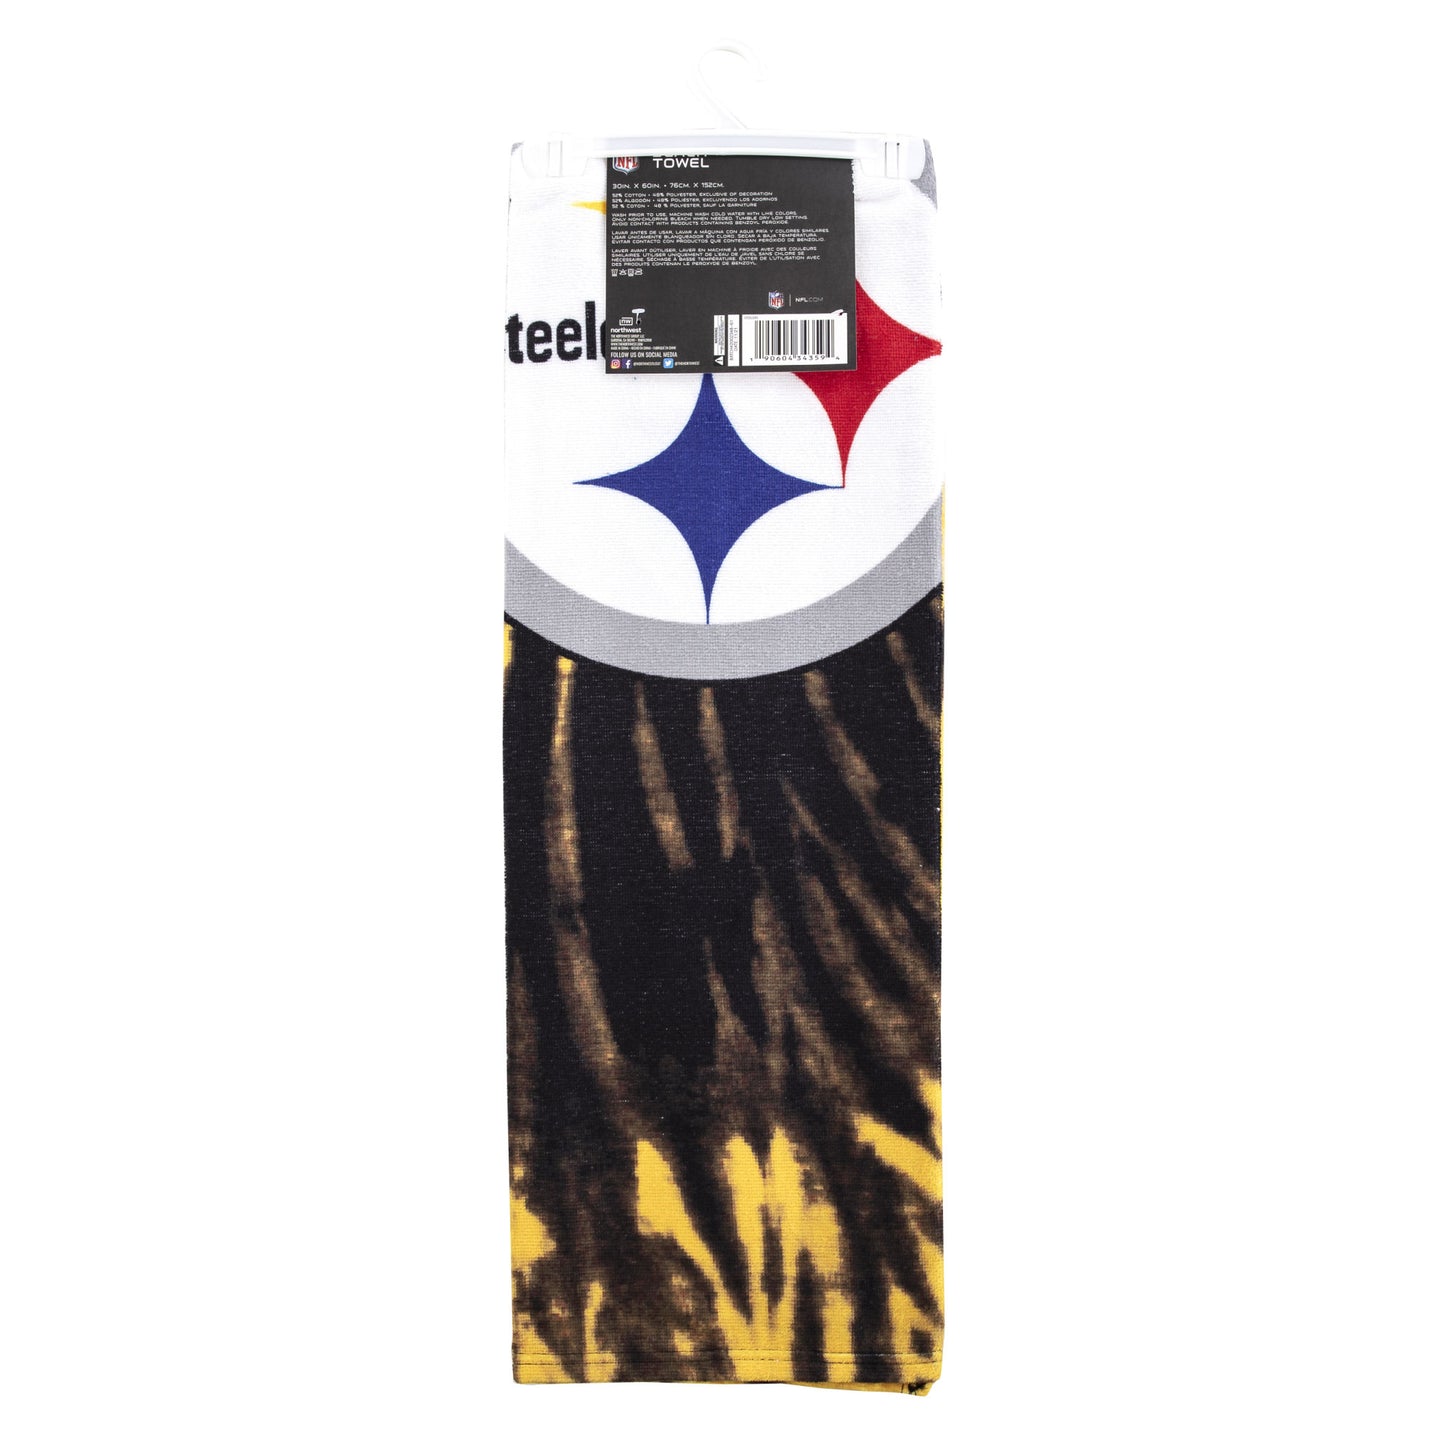 Steelers OFFICIAL NFL "Psychedelic" Beach Towel; 30" x 60"